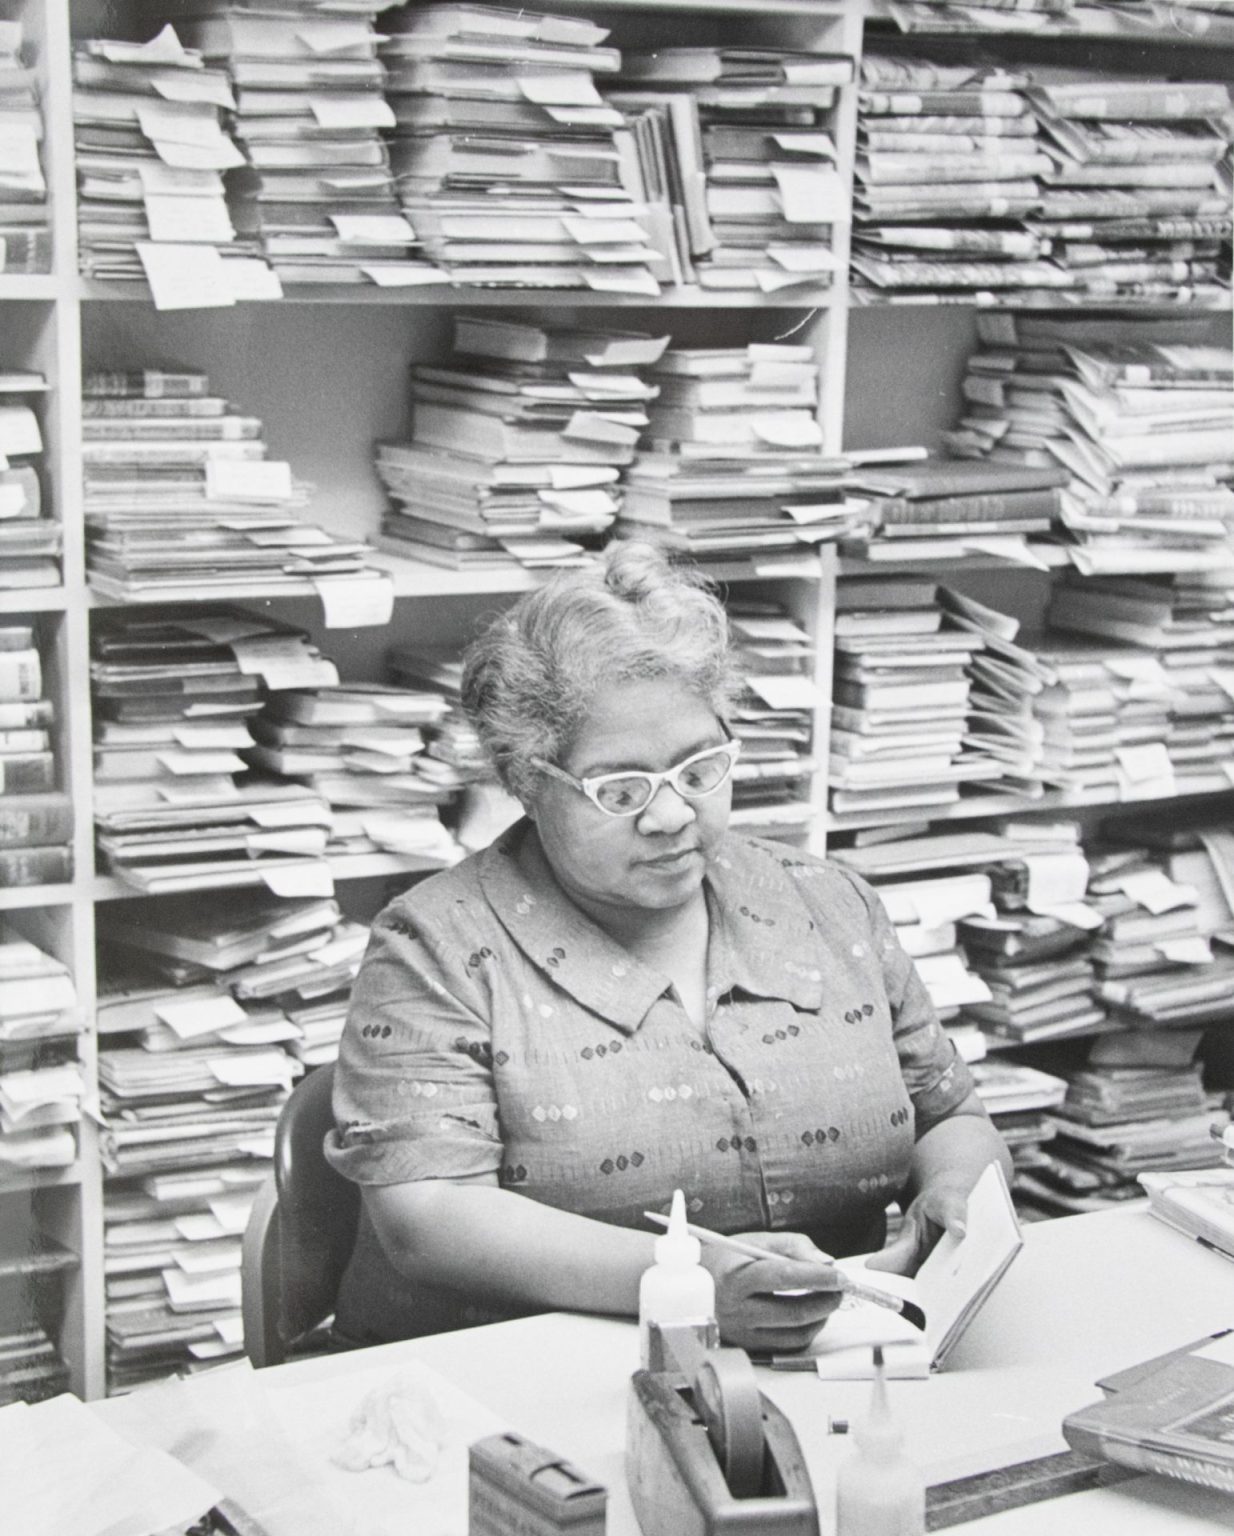 A woman with glasses uses a brush to repair a book binding in front of a shelf of books in this black and white photo.